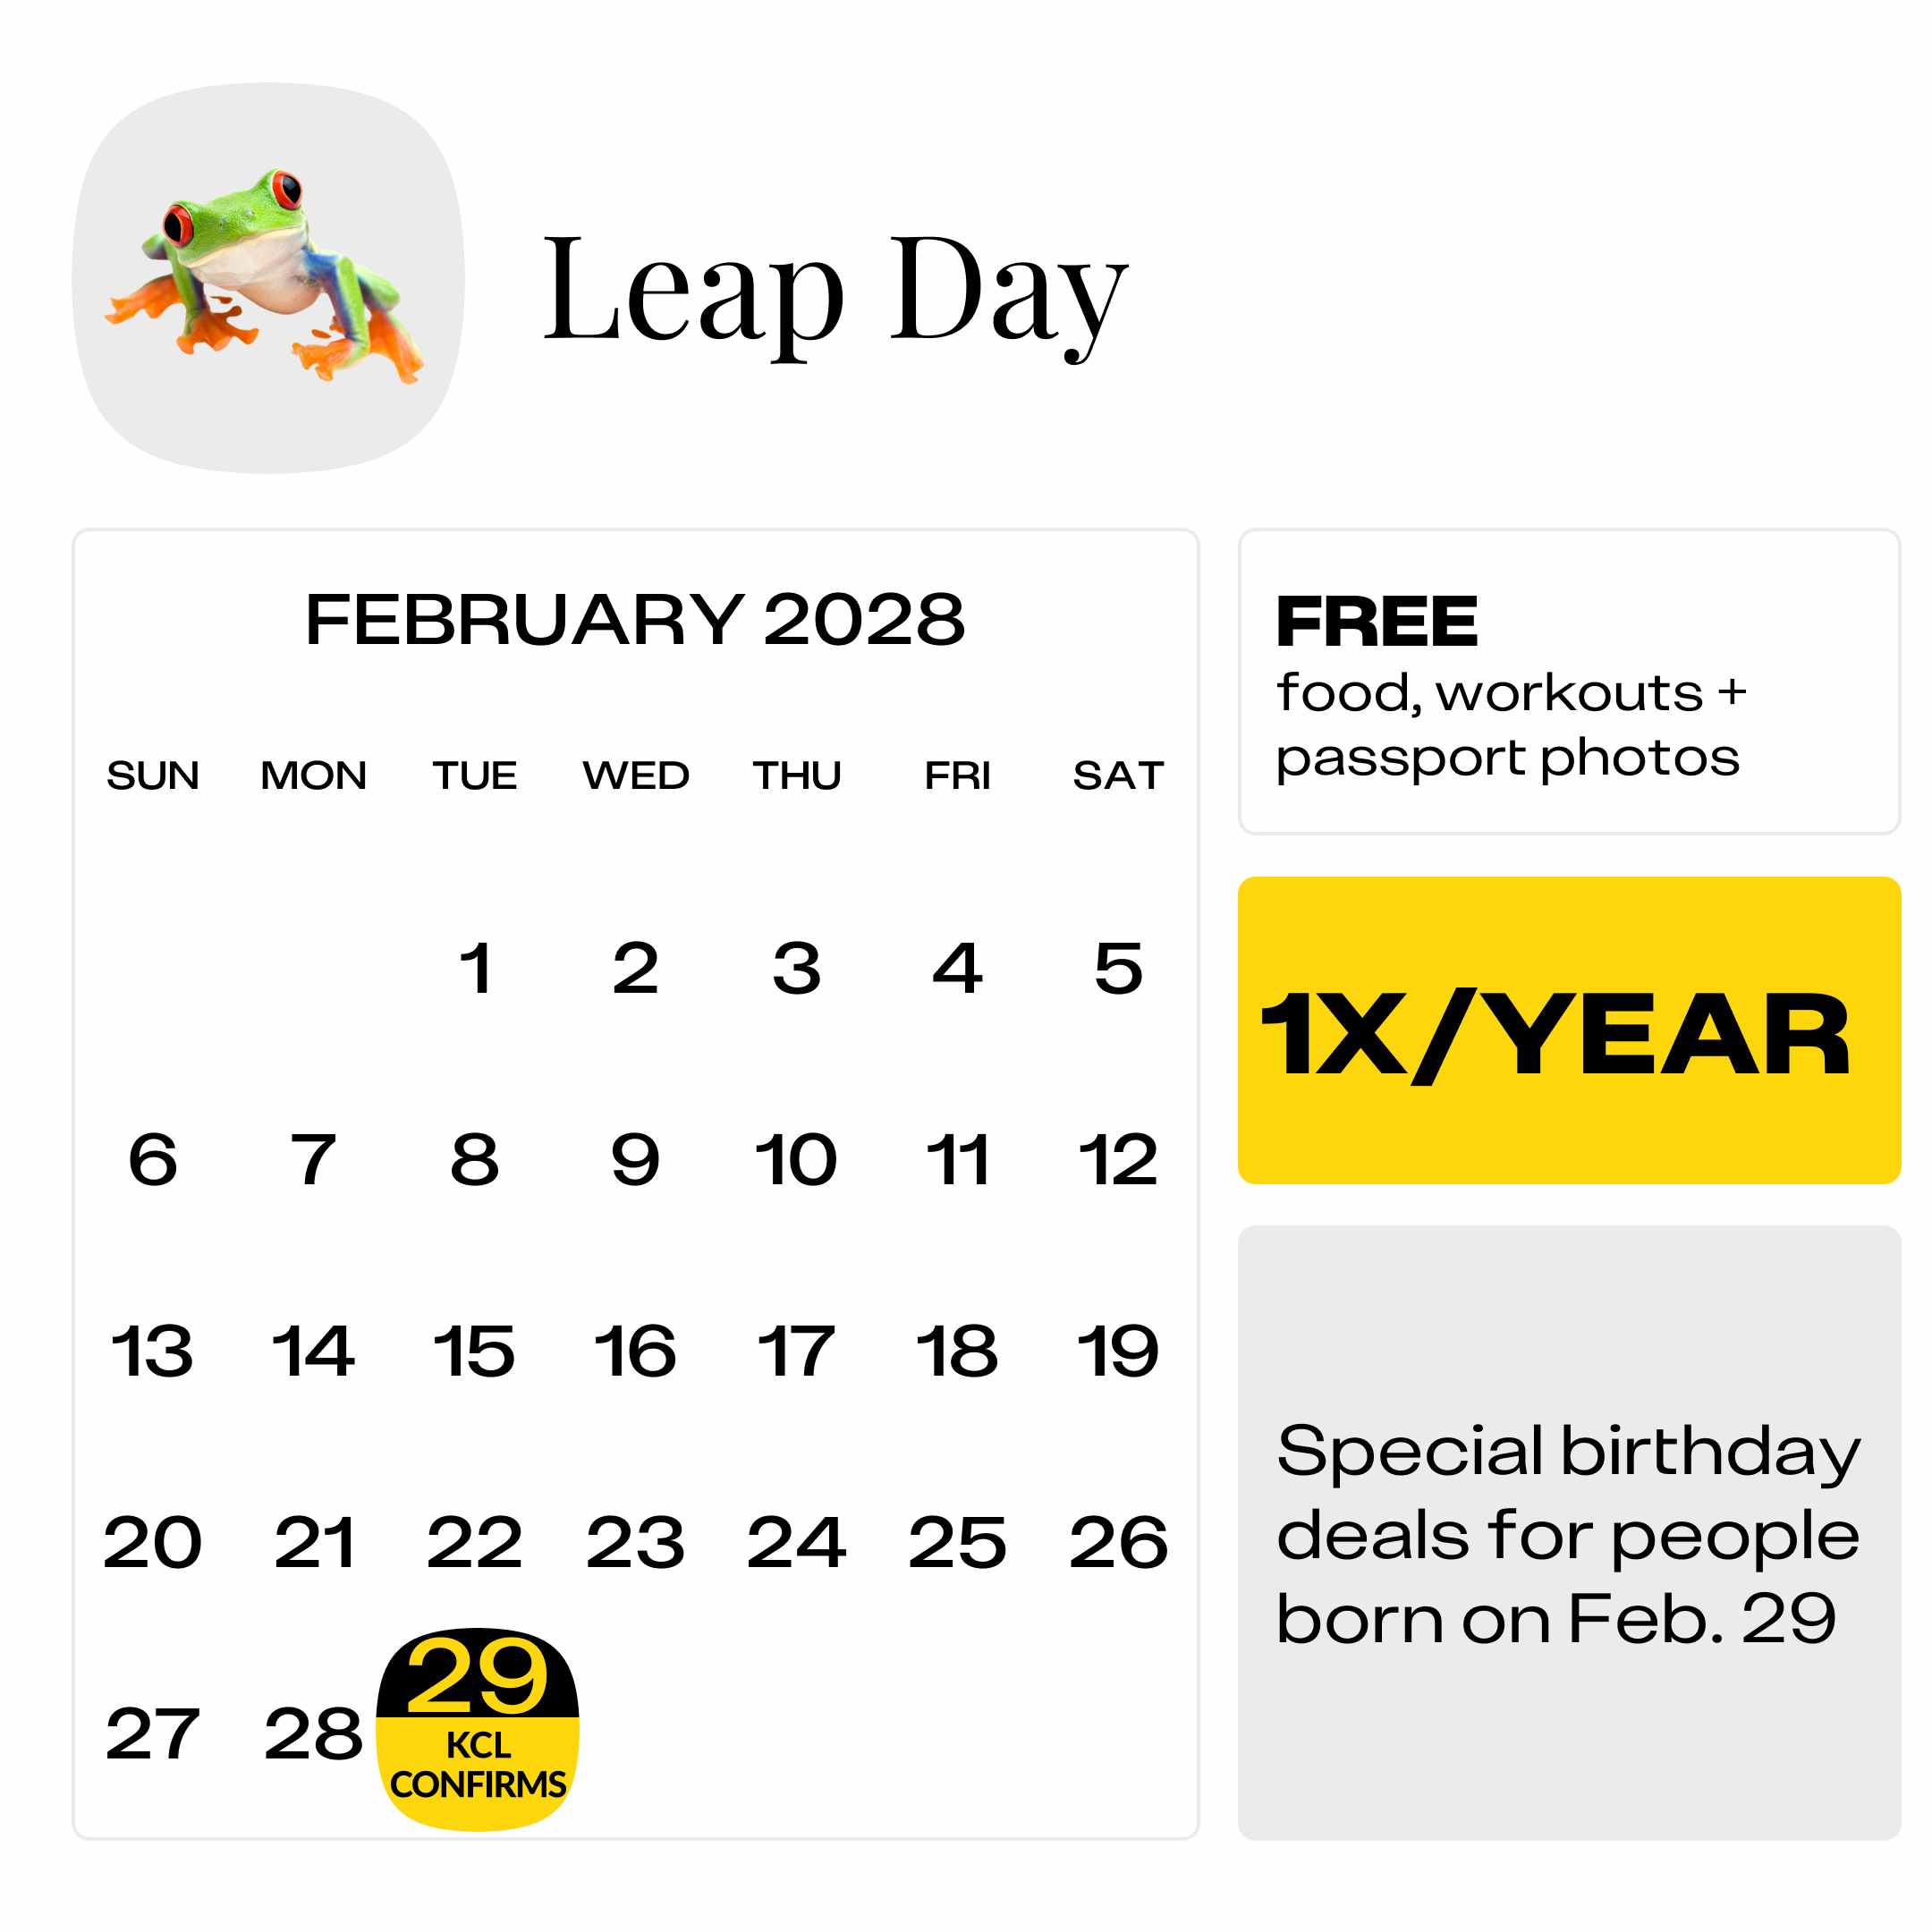 Leap-day-2028-graphic